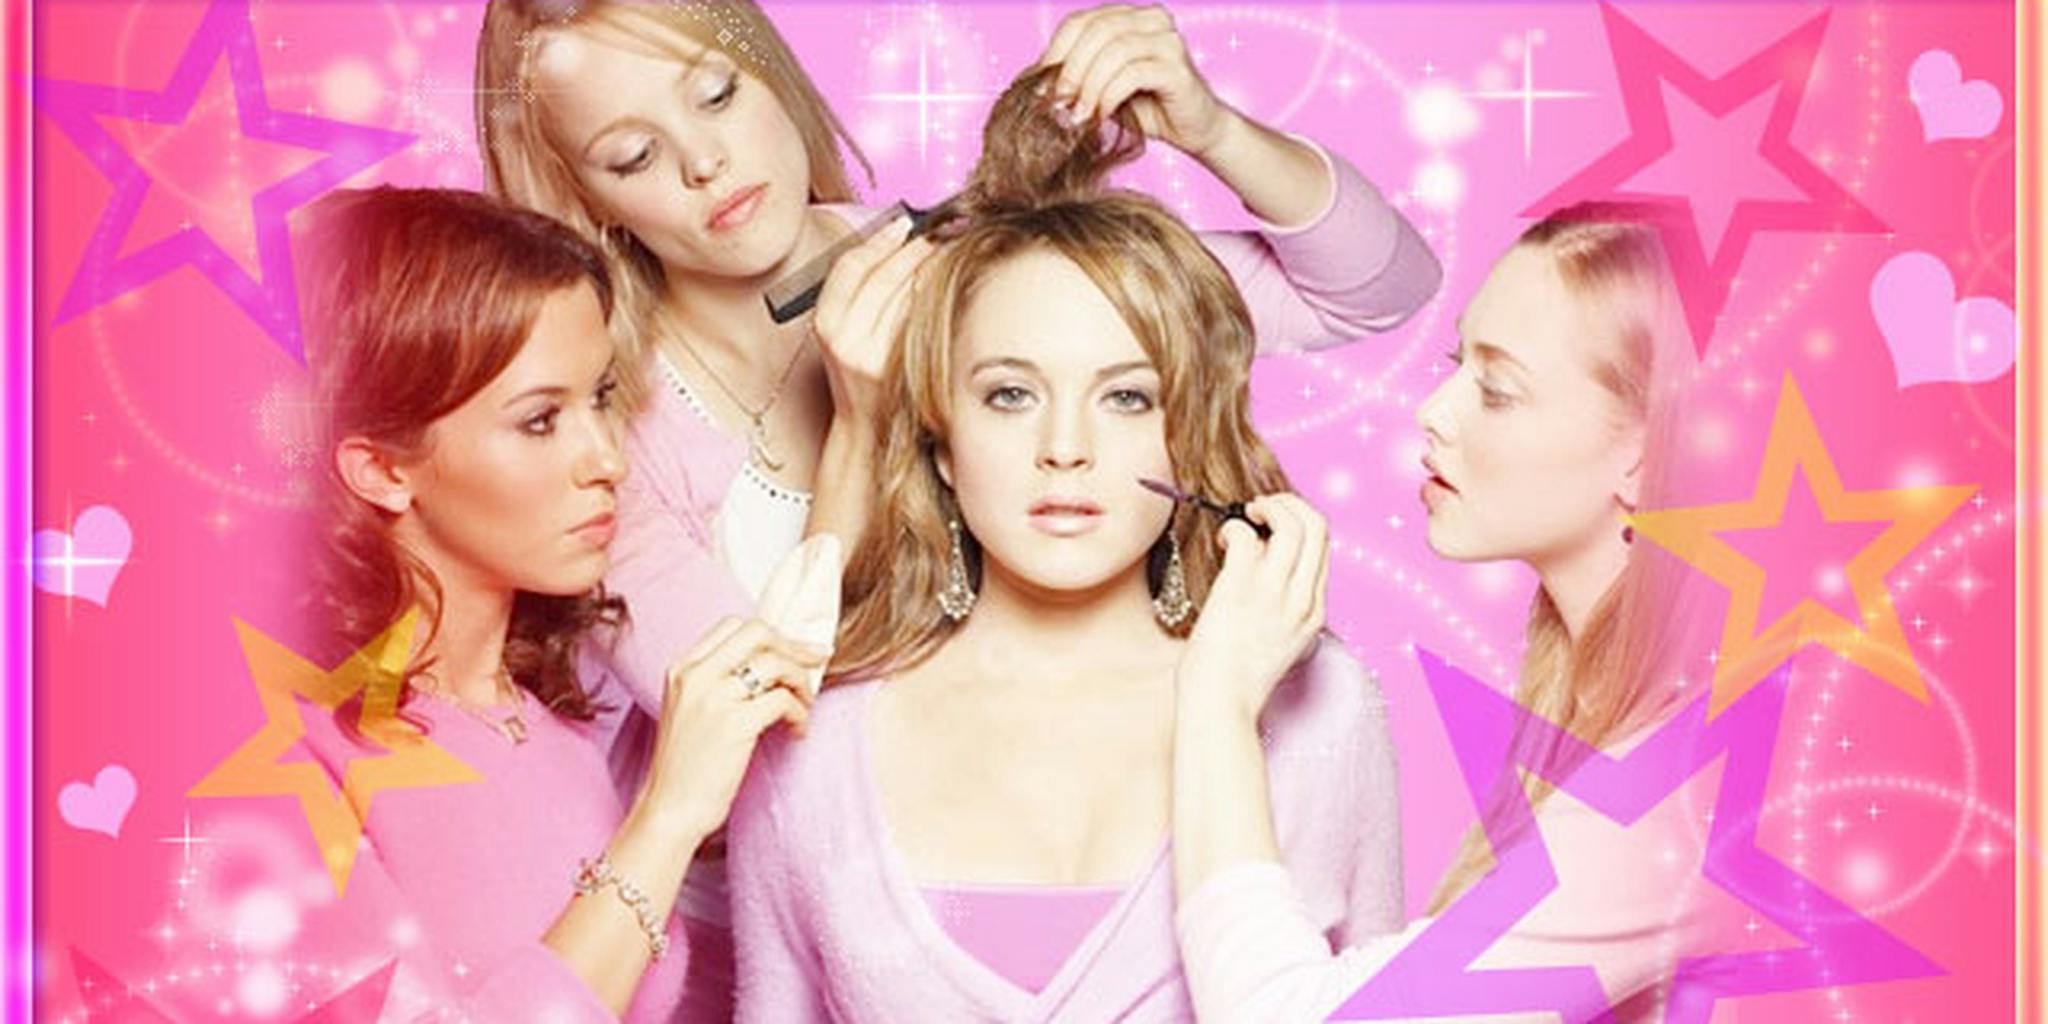 15 years later, 'Mean Girls' style is still fetch